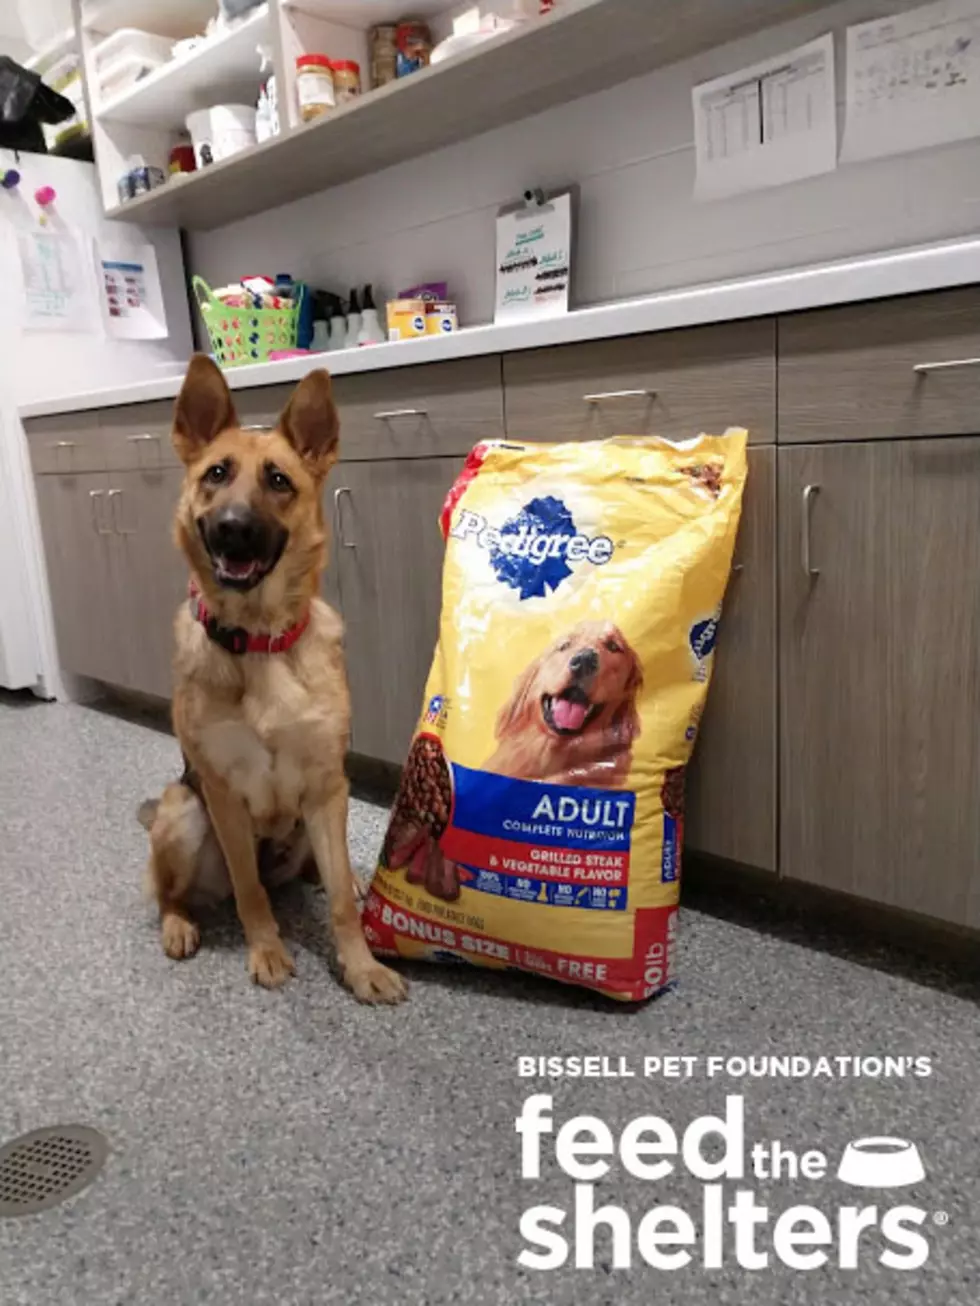 Bissell Pet Foundation Helps Feed Shelters in 9 States